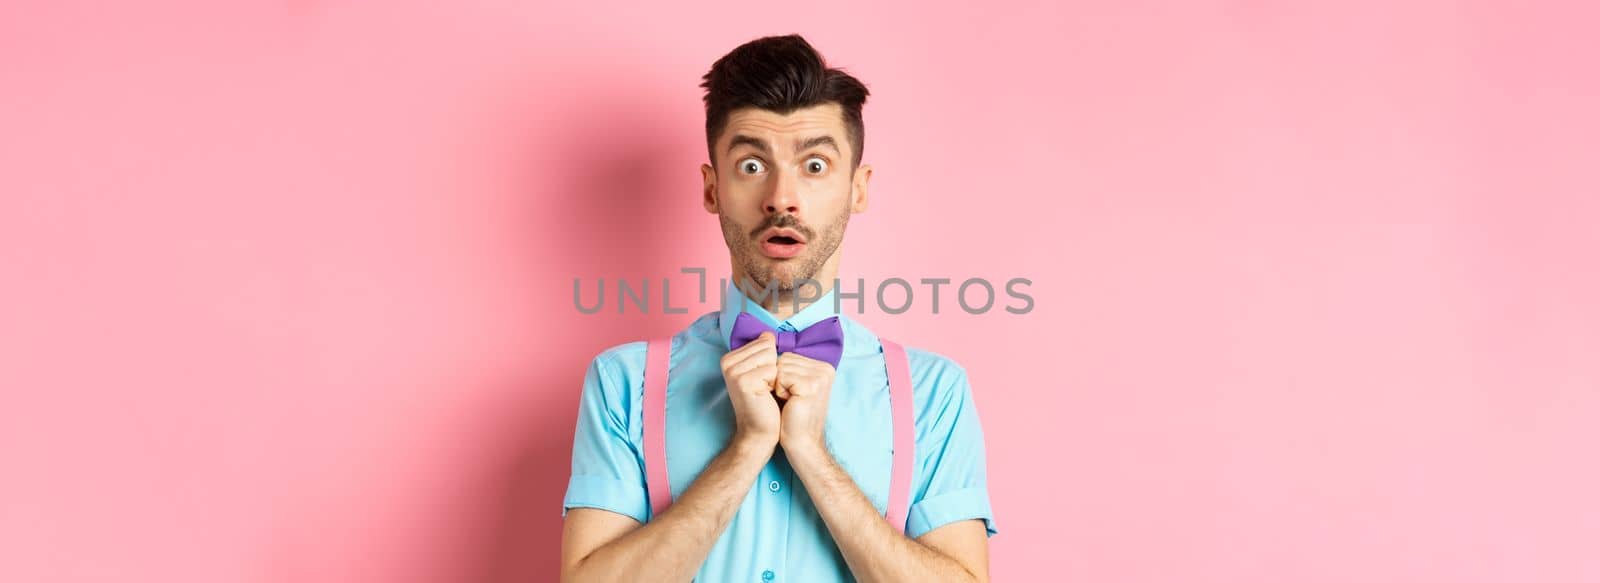 Startled and worried classy man in moustache, gasping and holding breath shocked, standing oin bow-tie over pink background.